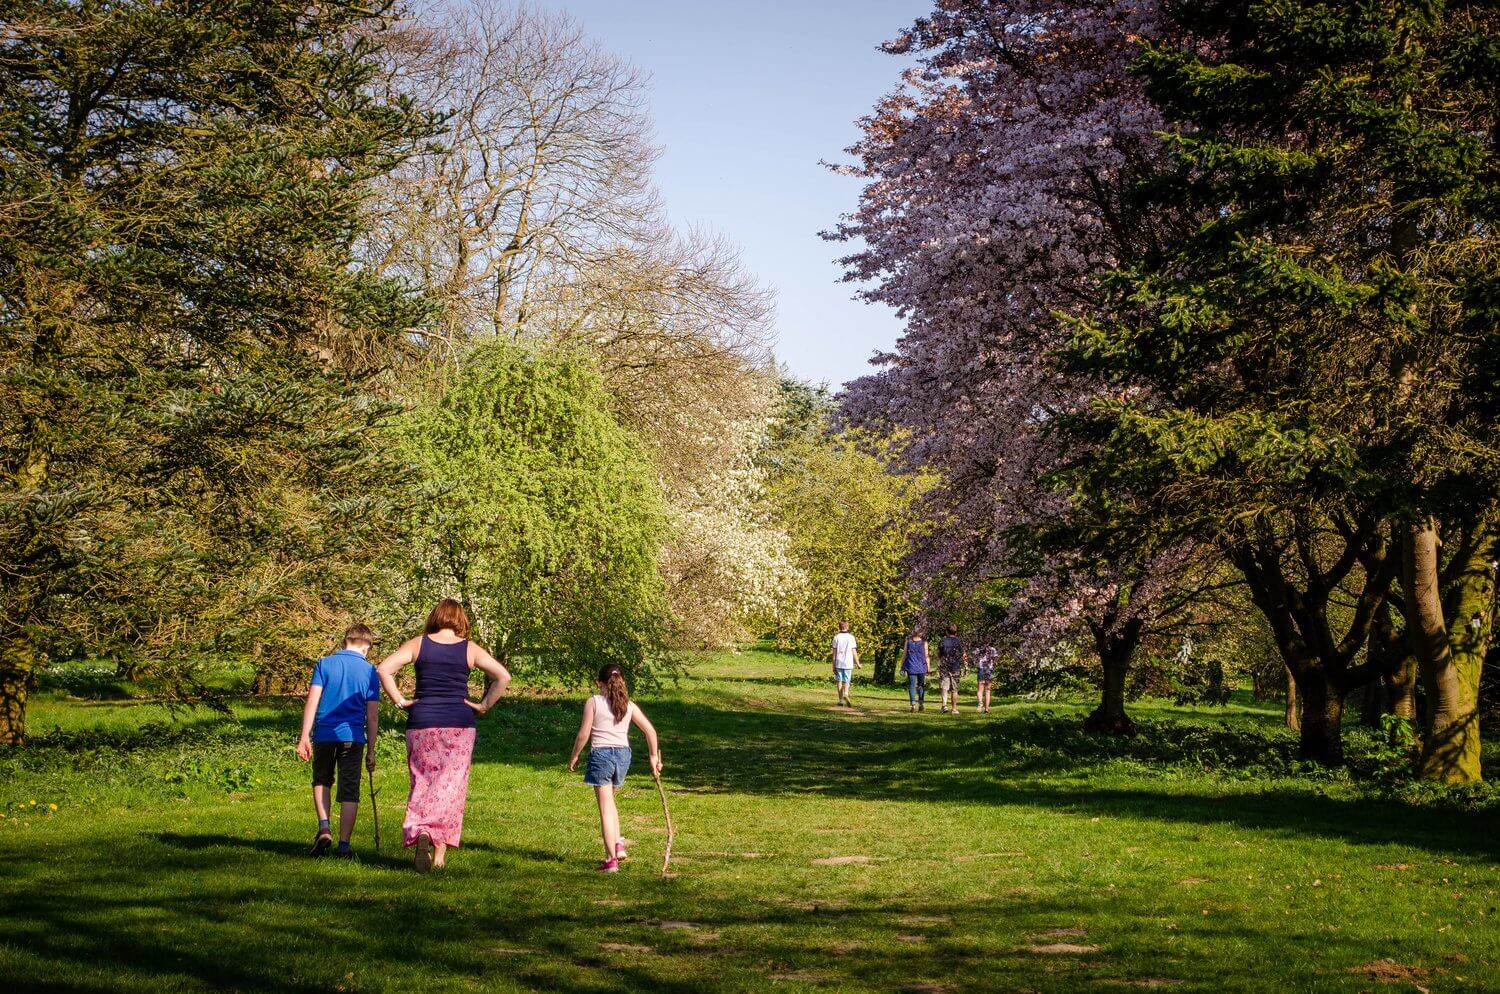 The Yorkshire Arboretum is now open daily